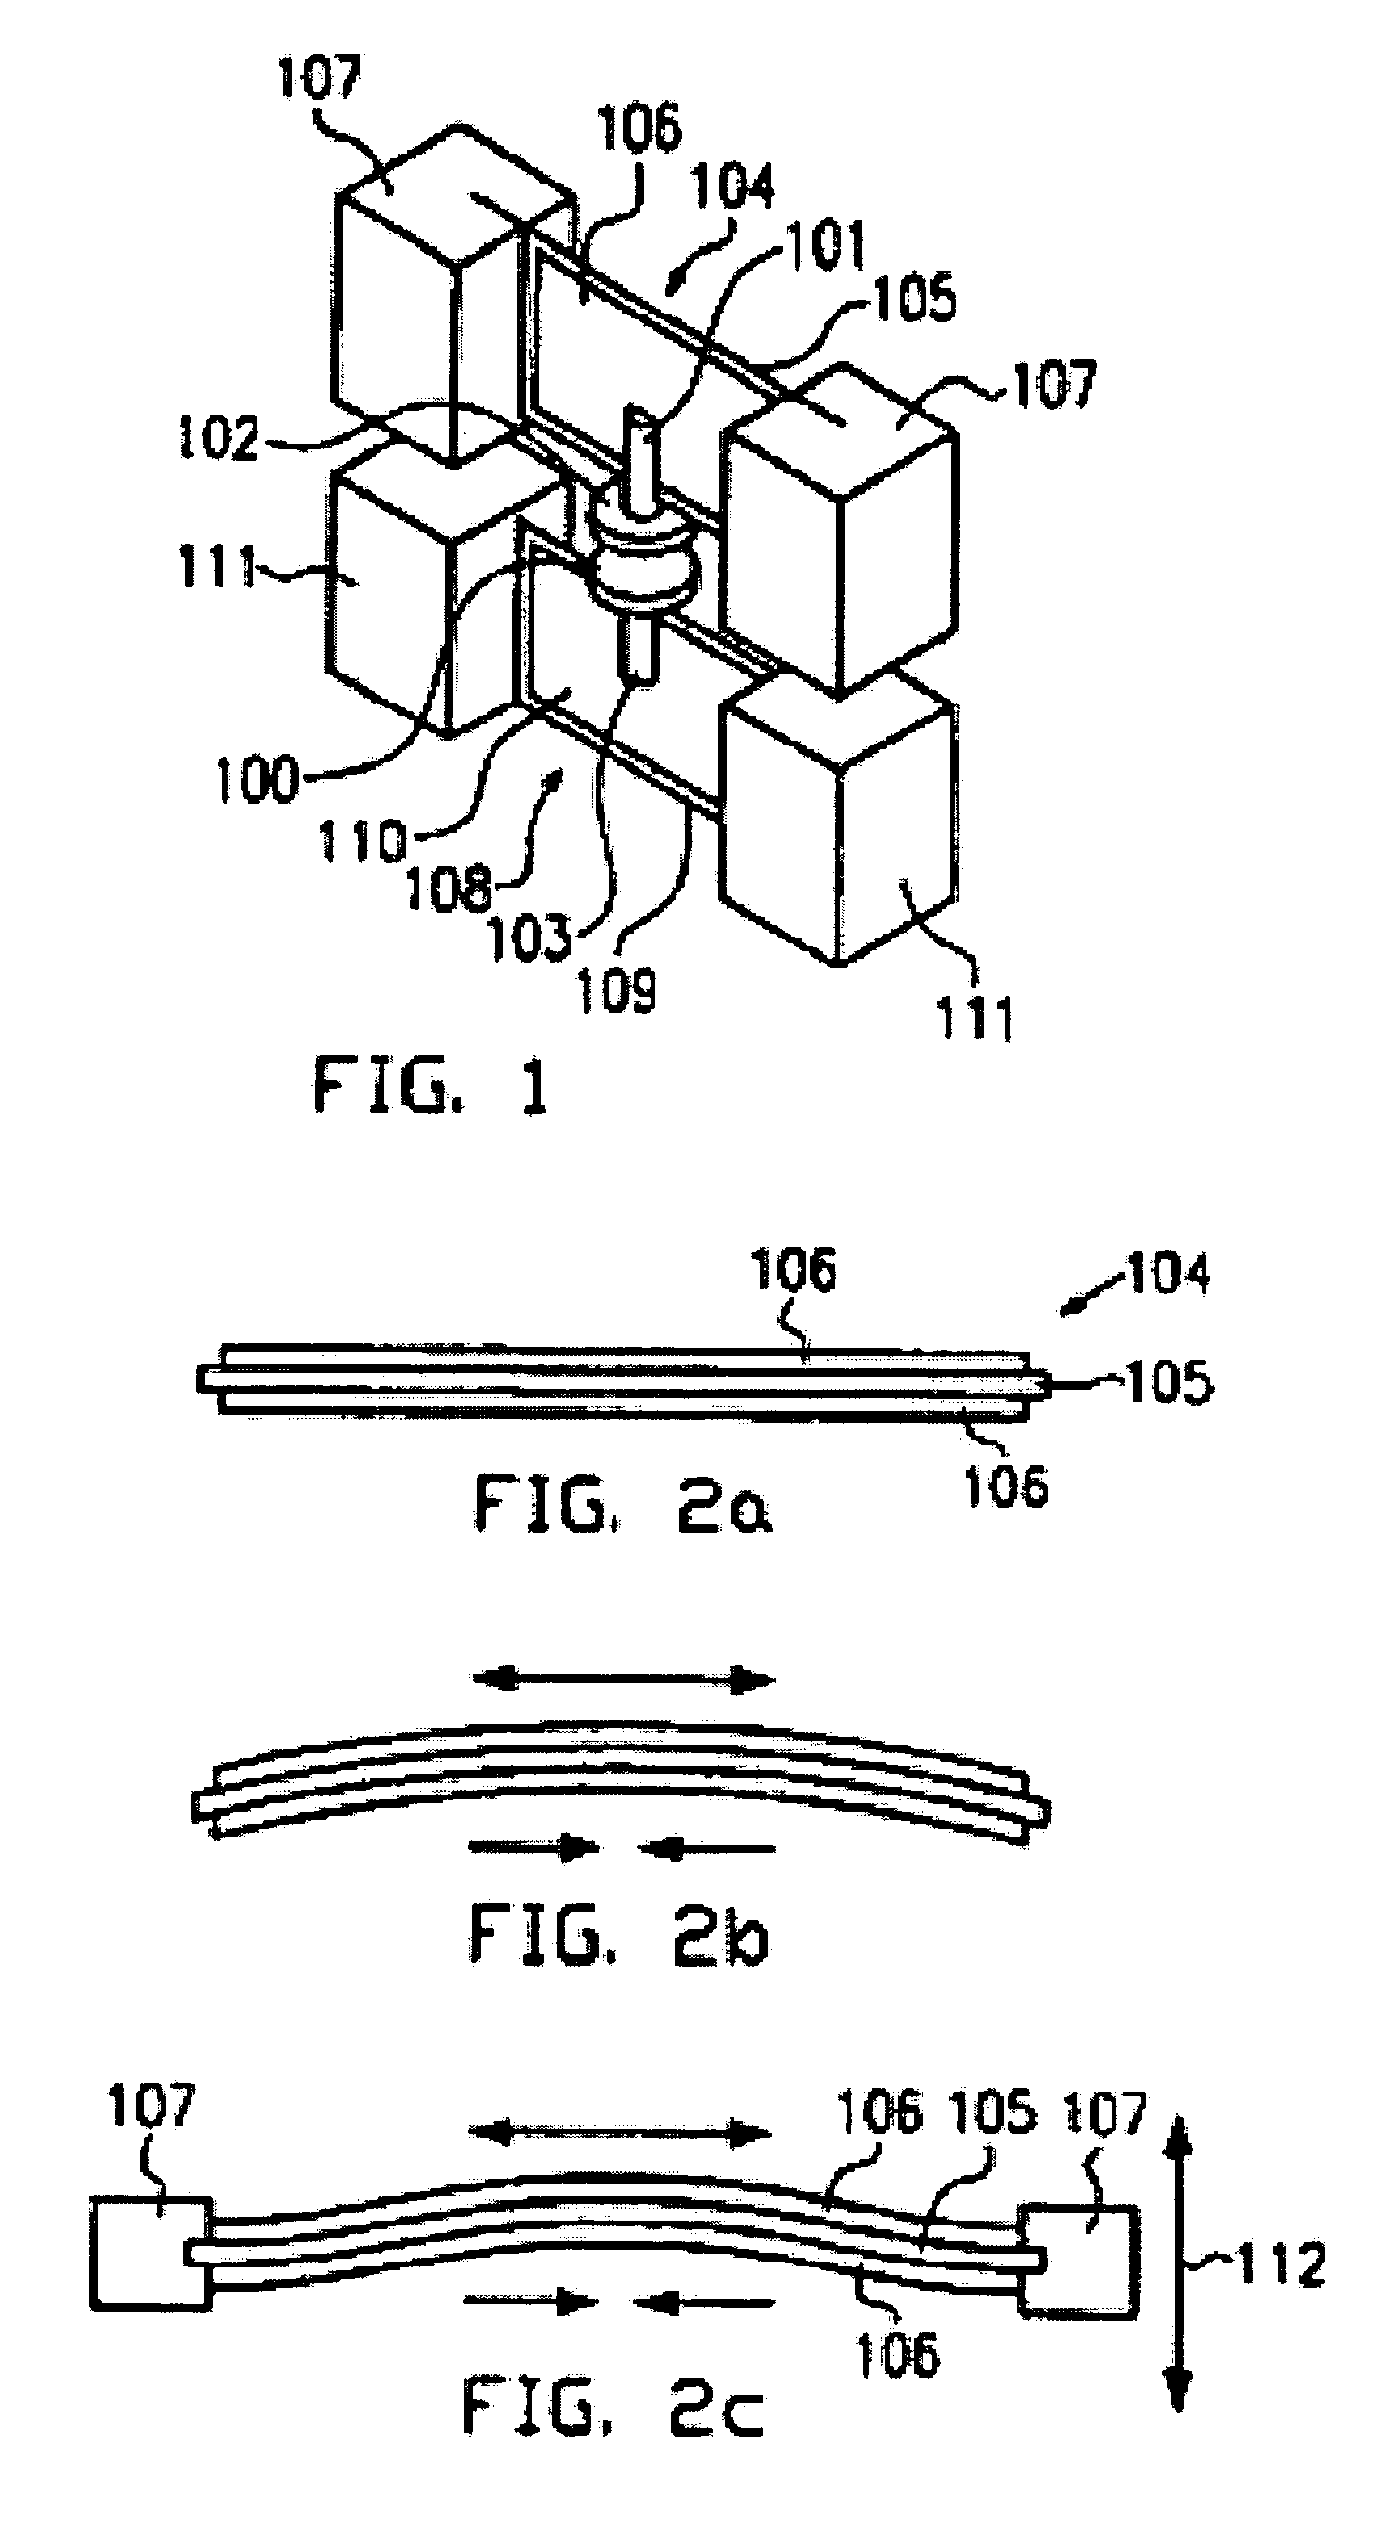 Tether plate sensor for measuring physical properties of fluid samples